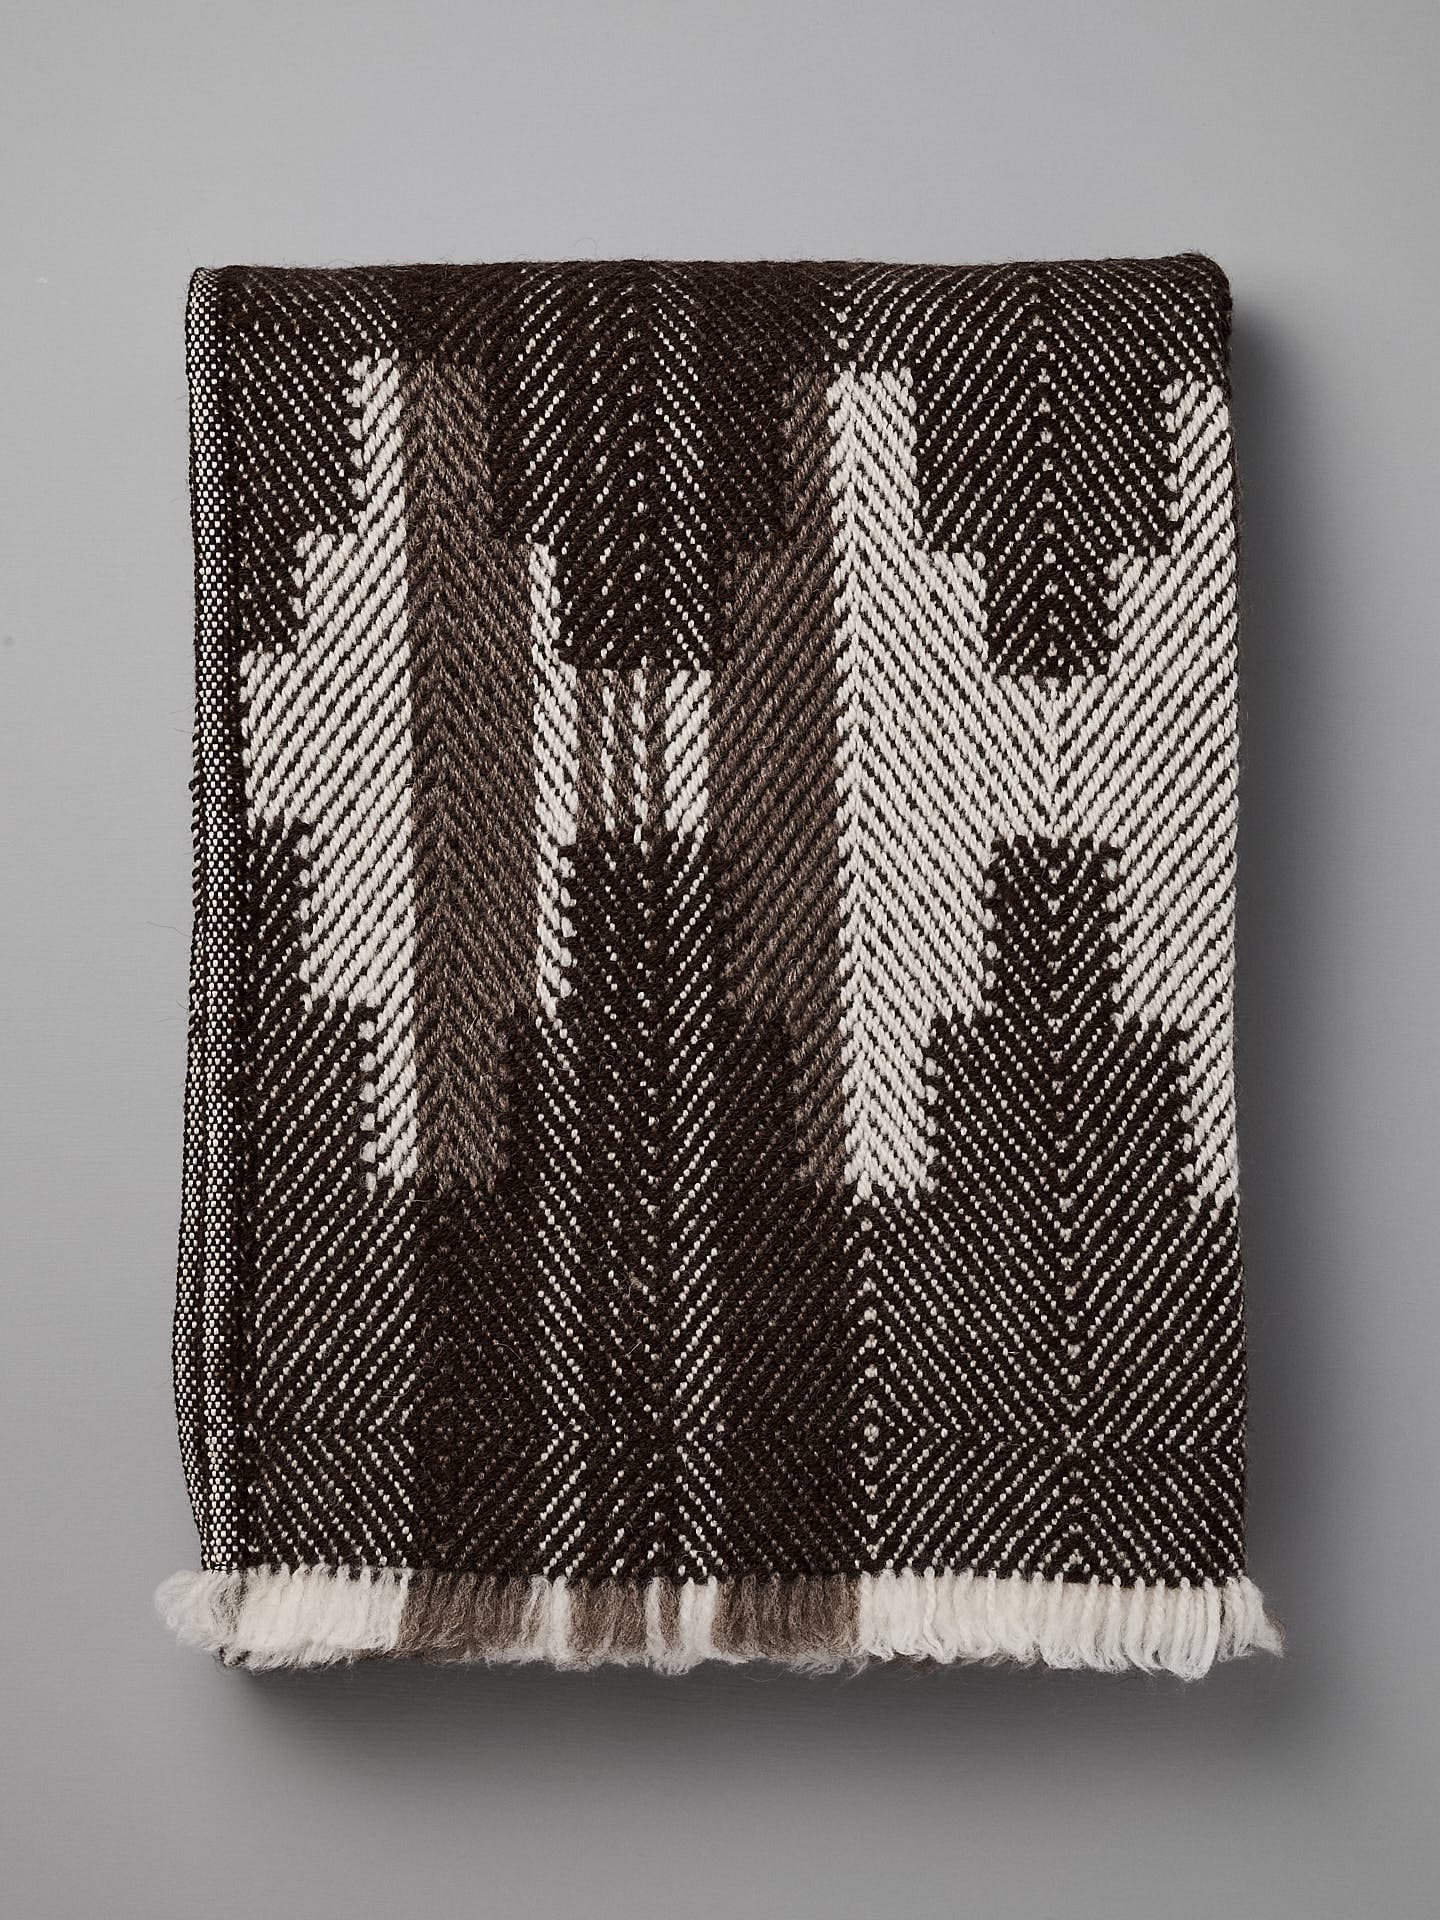 A folded, black and white patterned blanket with geometric designs, reminiscent of traditional Bulgarian shevitza, is displayed against a plain gray background. 

Replace with: 

A folded Rodopska Takan "Bulgarian Shevitza Wool Blanket – Brown" with geometric designs, reminiscent of traditional Bulgarian shevitza, is displayed against a plain gray background.